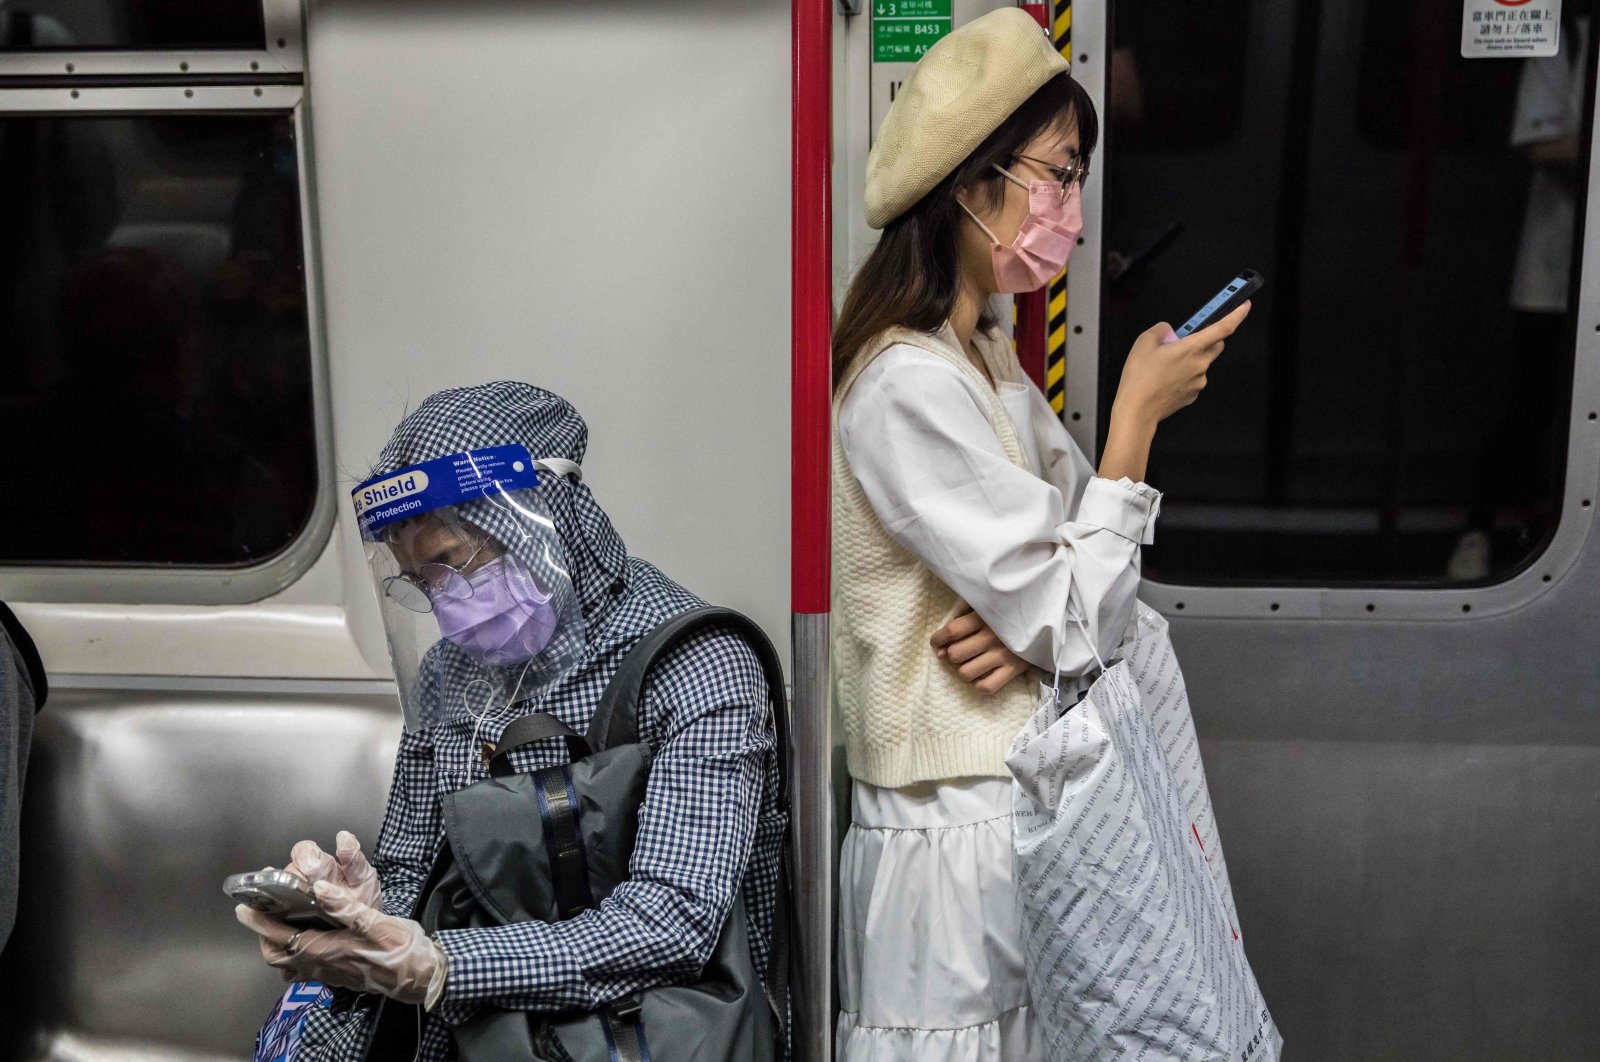 People wear face masks as a preventive measure against COVID-19 during a commute on a train in Hong Kong, March 2, 2022. (AFP Photo)